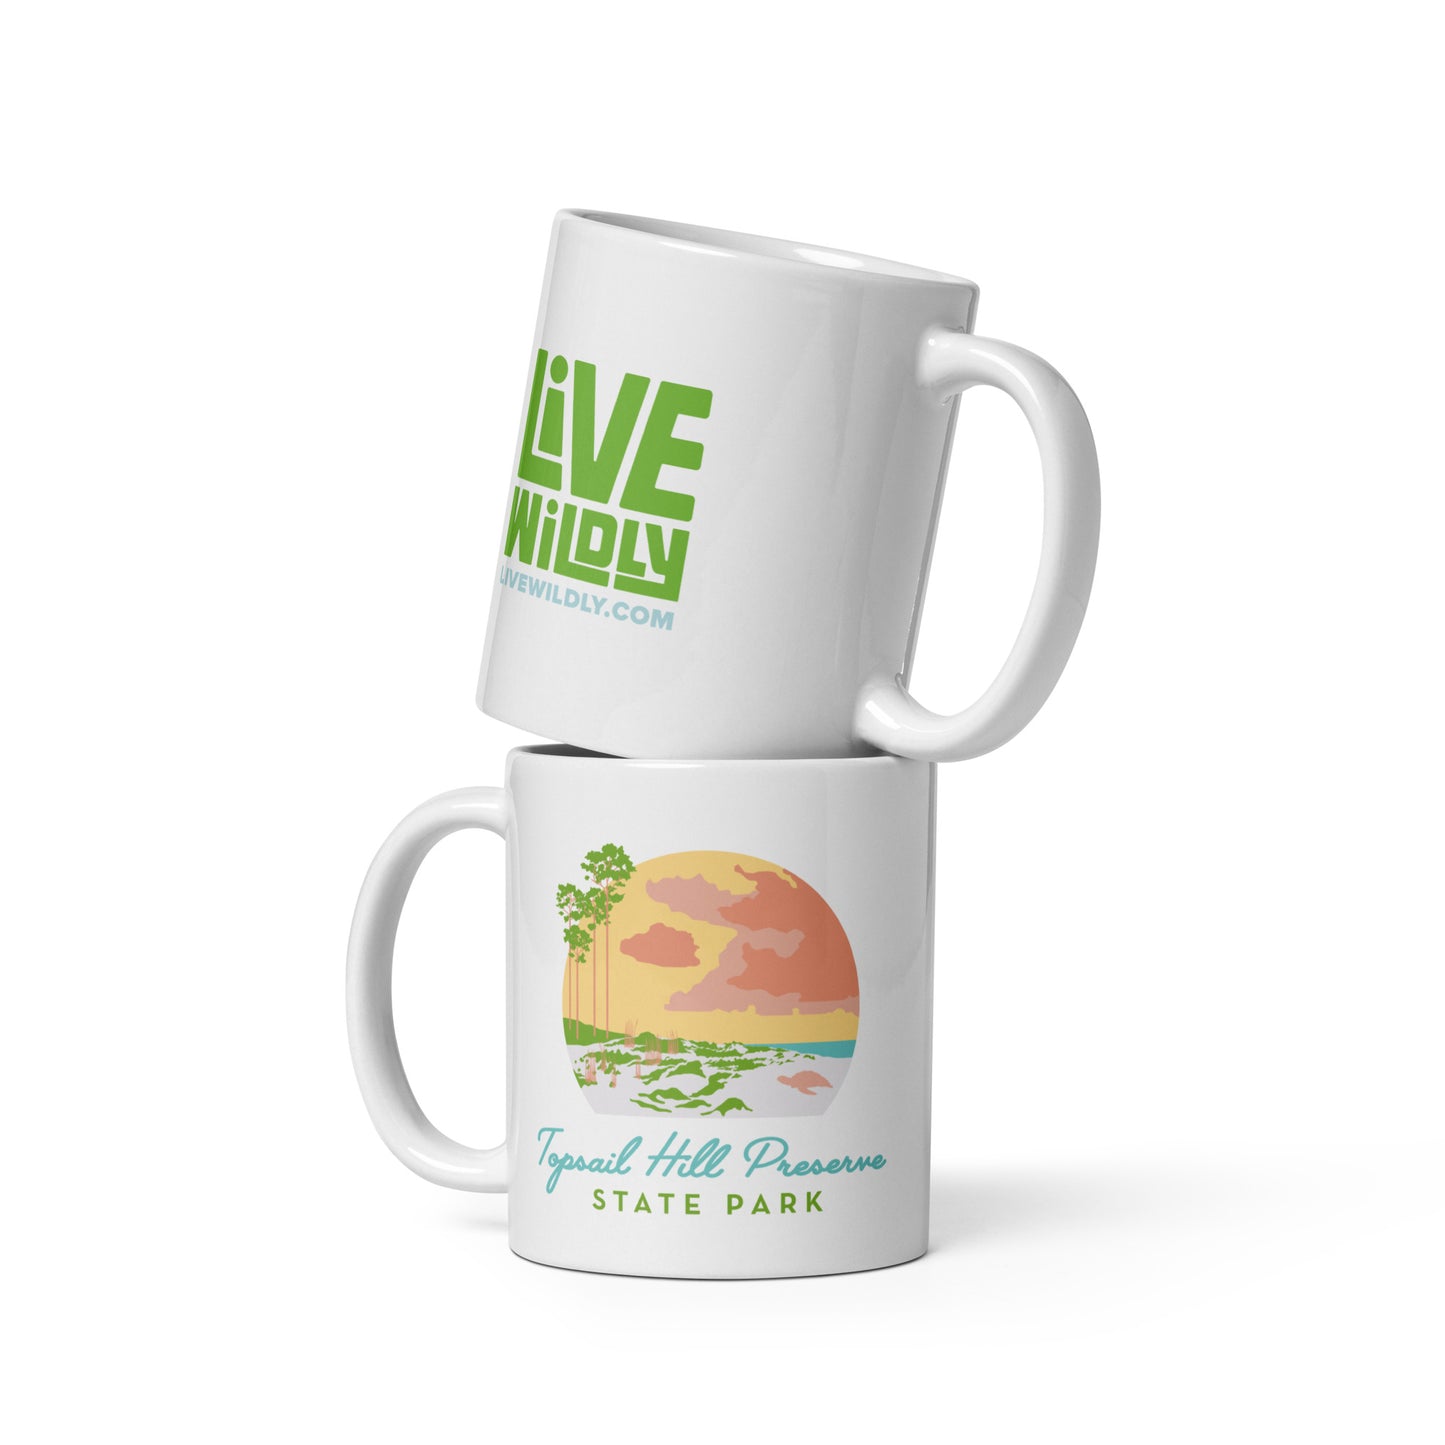 Topsail Hill Preserve Mug by AMLgMATD - Live Wildly 